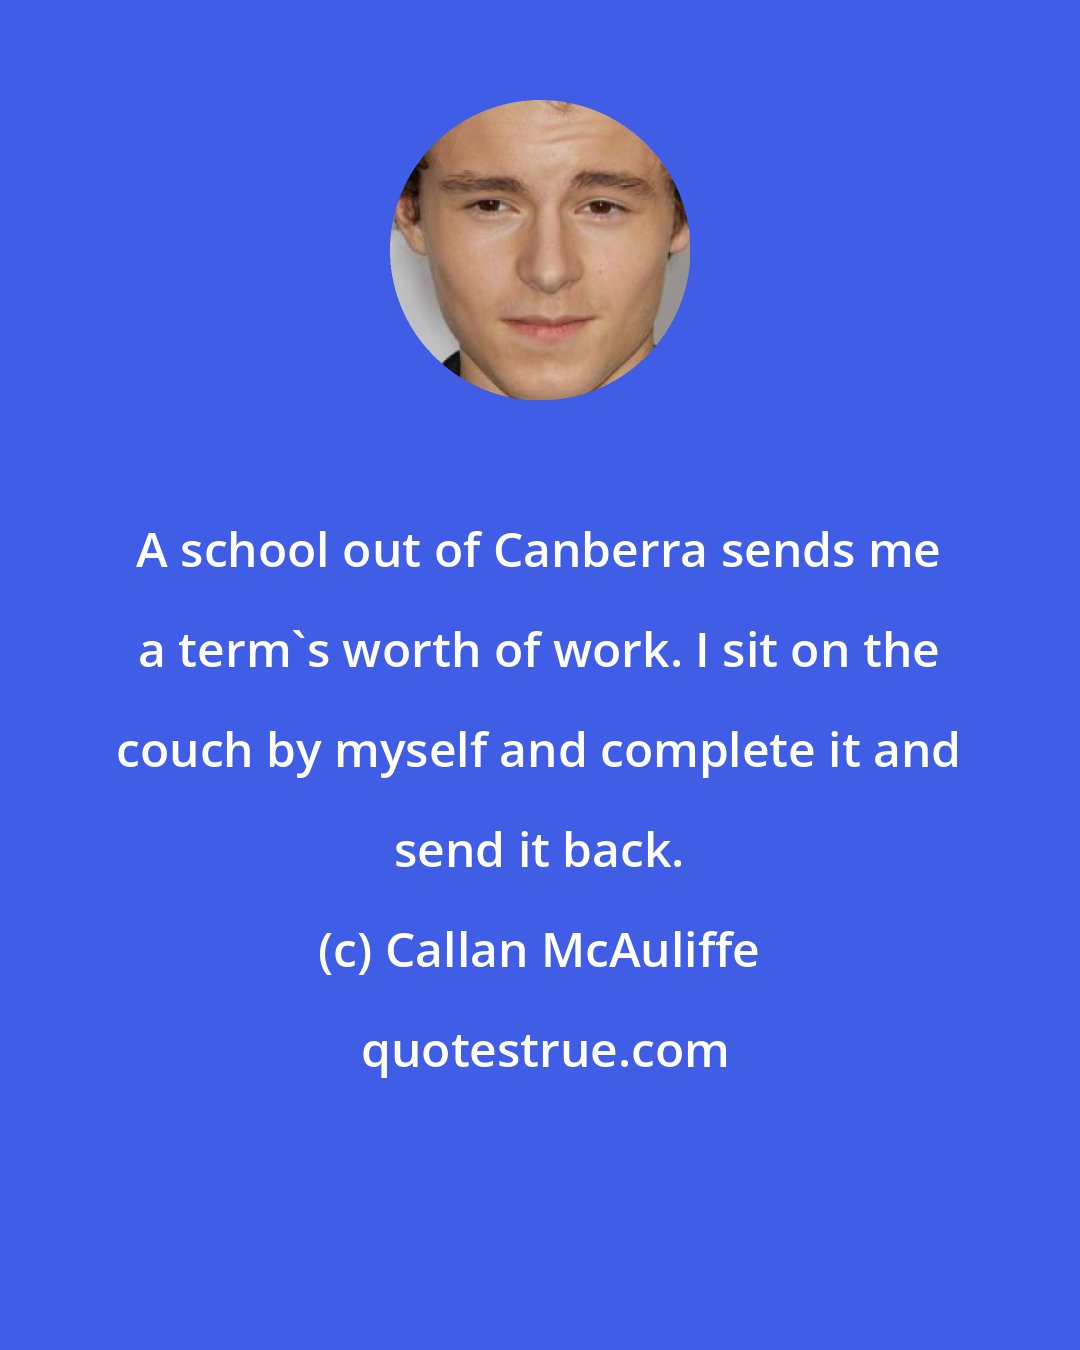 Callan McAuliffe: A school out of Canberra sends me a term's worth of work. I sit on the couch by myself and complete it and send it back.